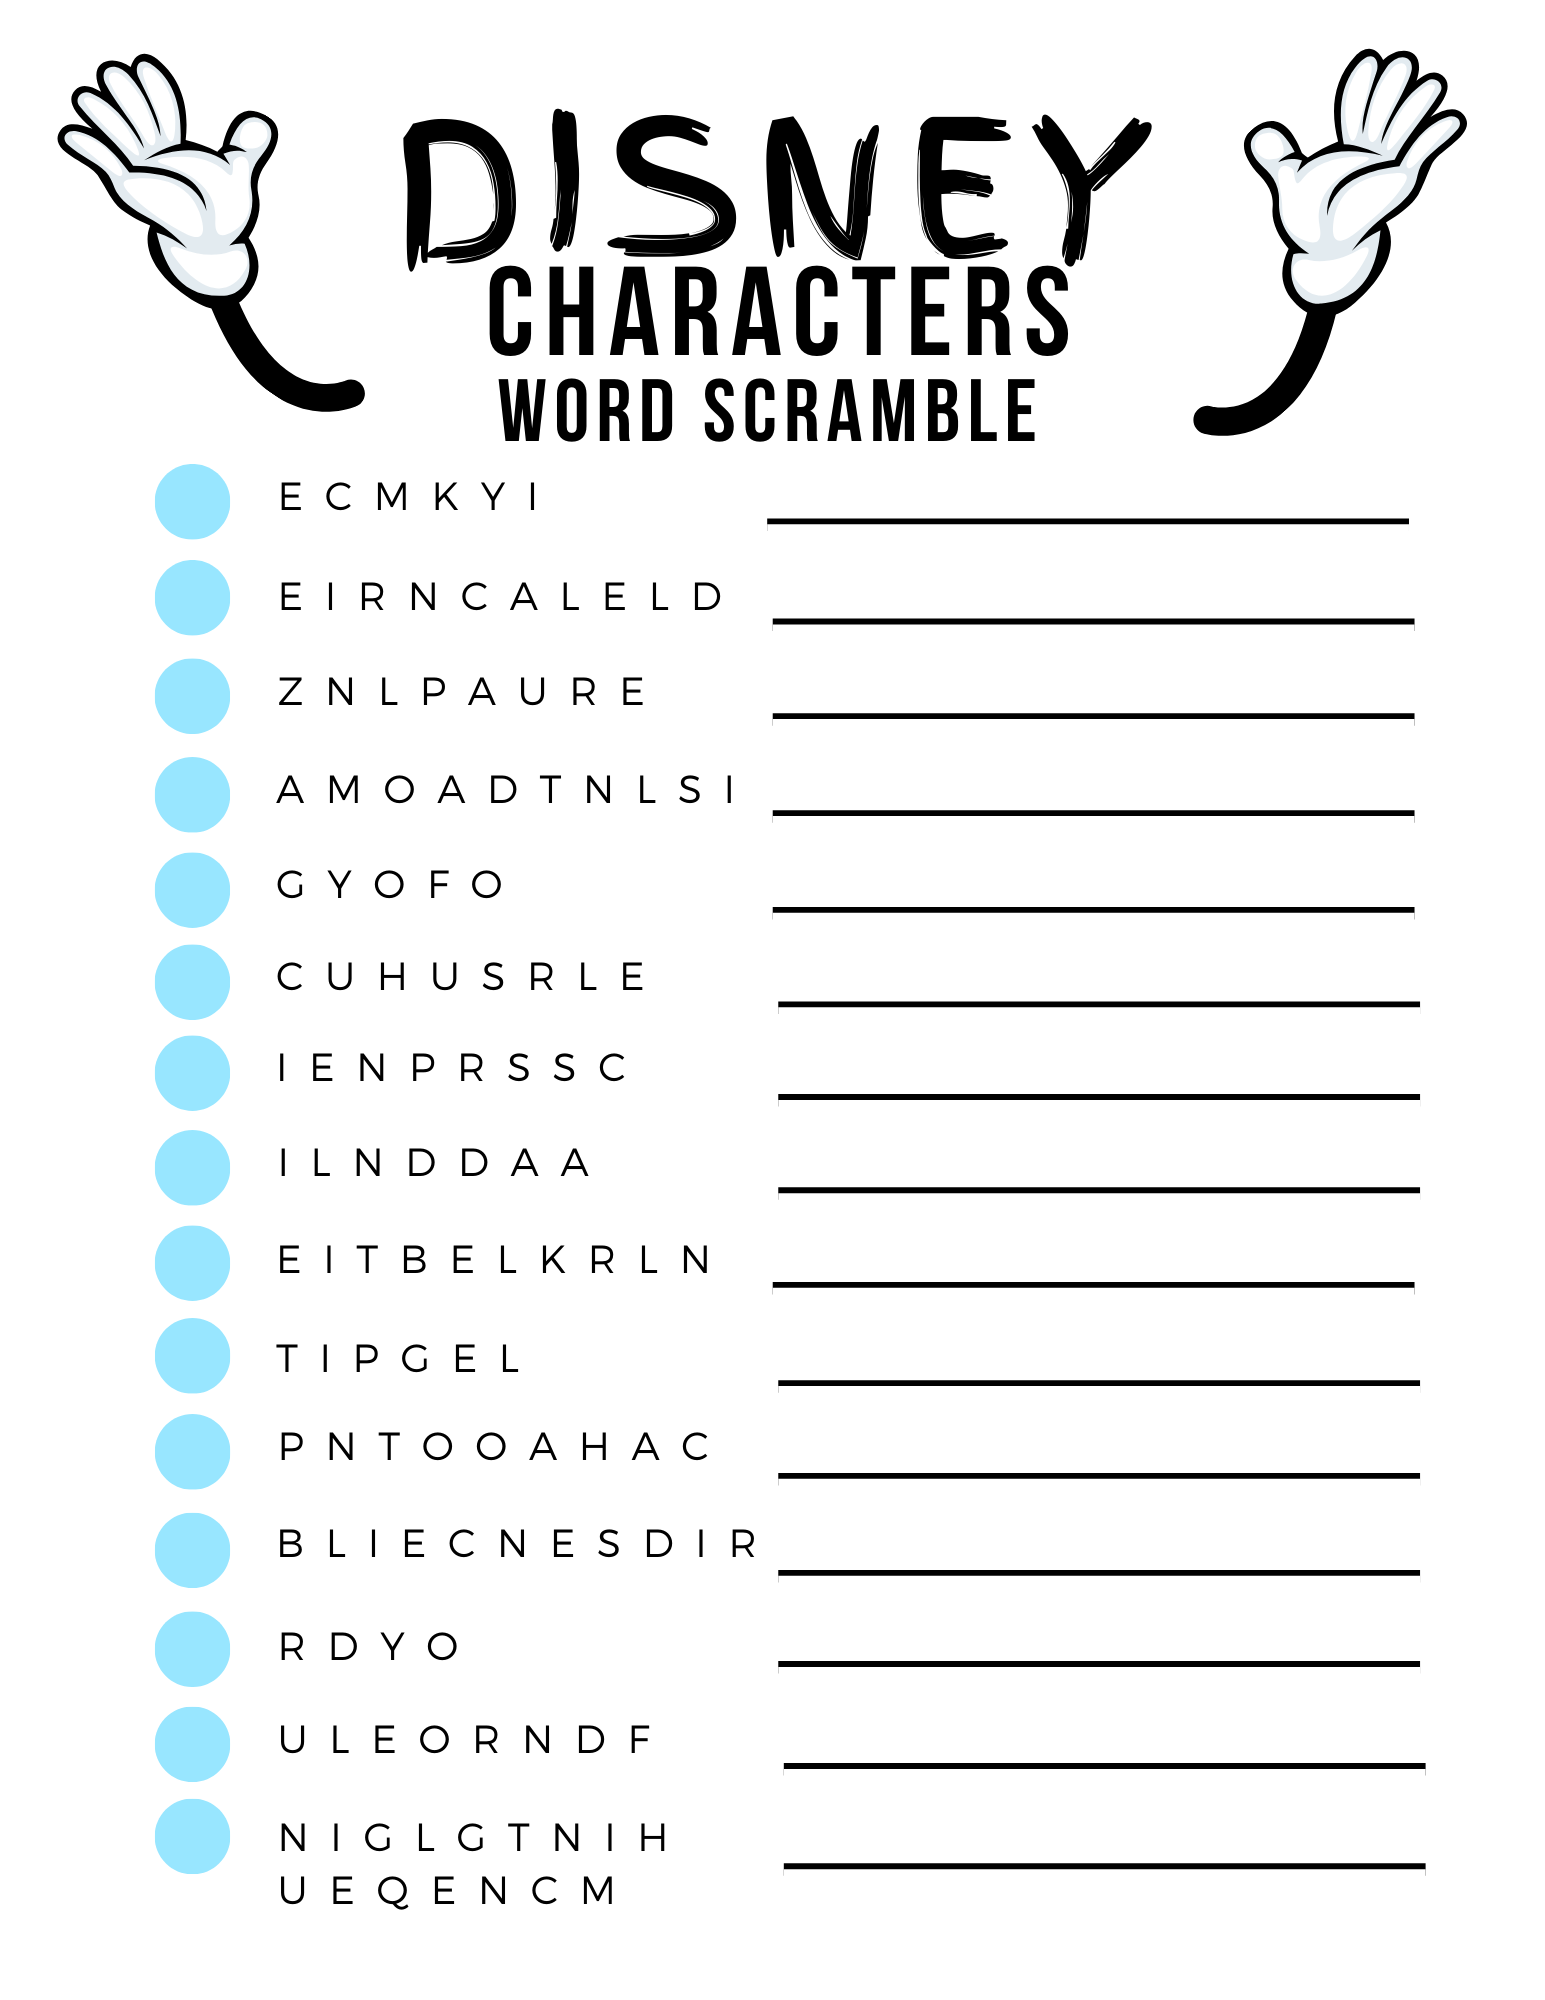 Disney Word Scramble Game FREE printable featured by top US Disney blogger, Marcie and the Mouse.